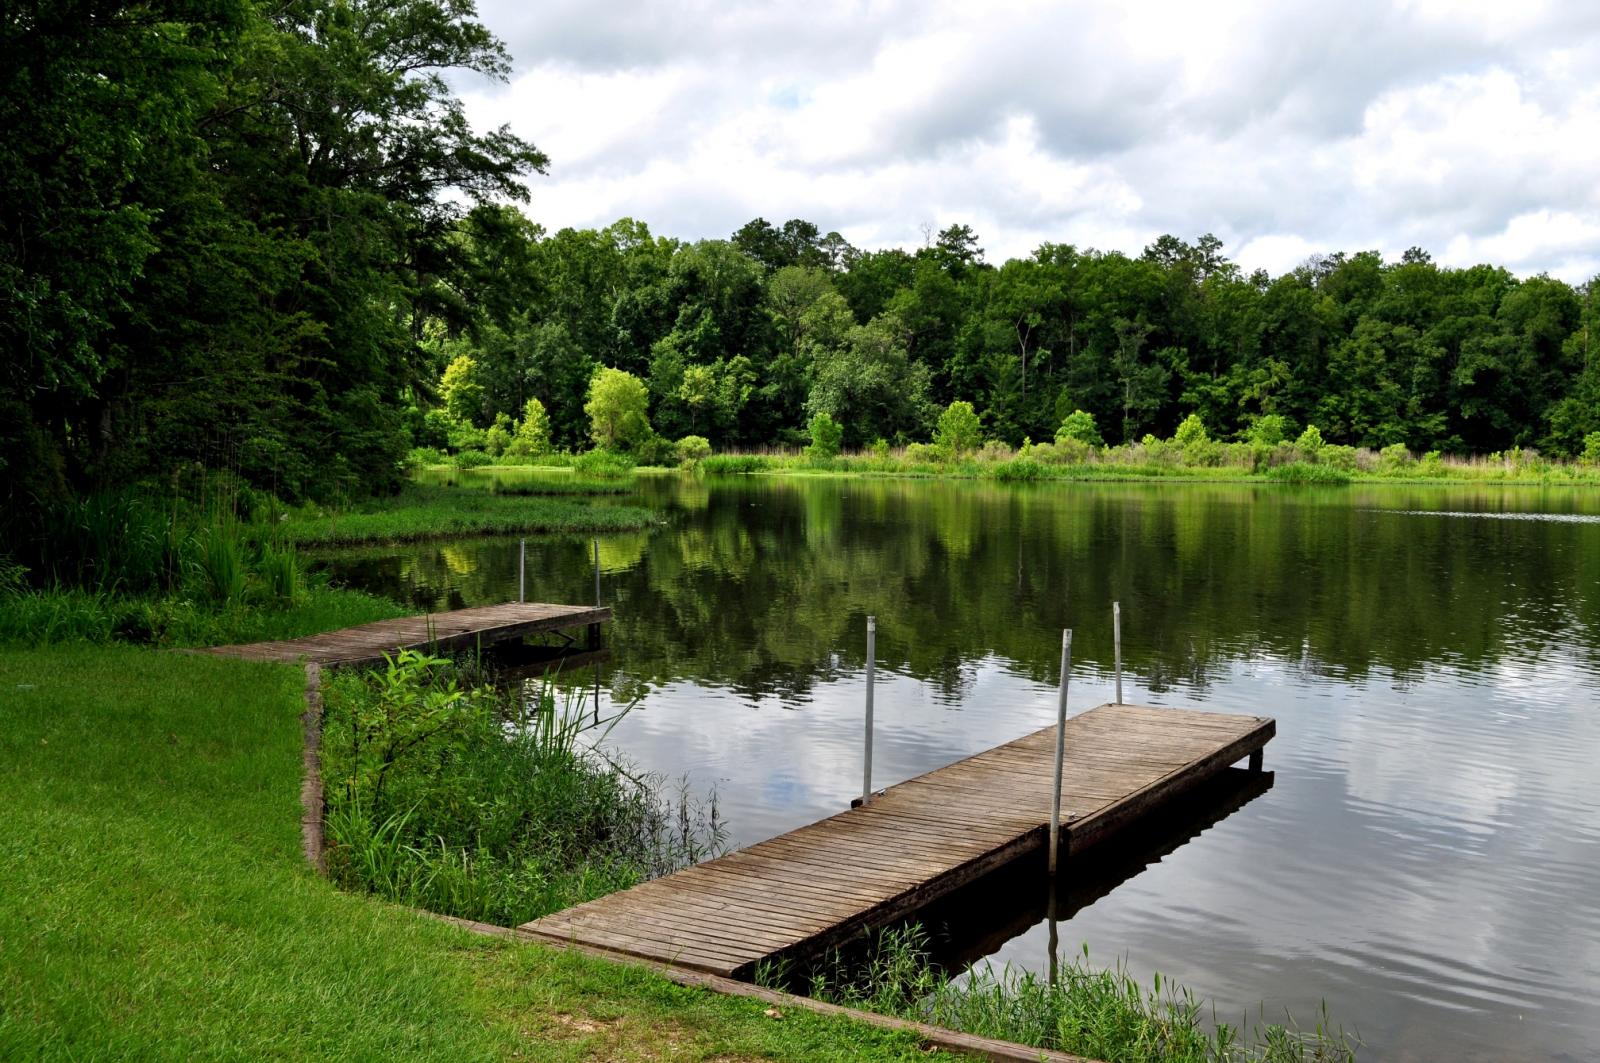 When visiting the Alabama River, we highly recommend including a trip to Roland Cooper State Park. Camping, birdwatching opportunities and great fishing are all part of the experience there.